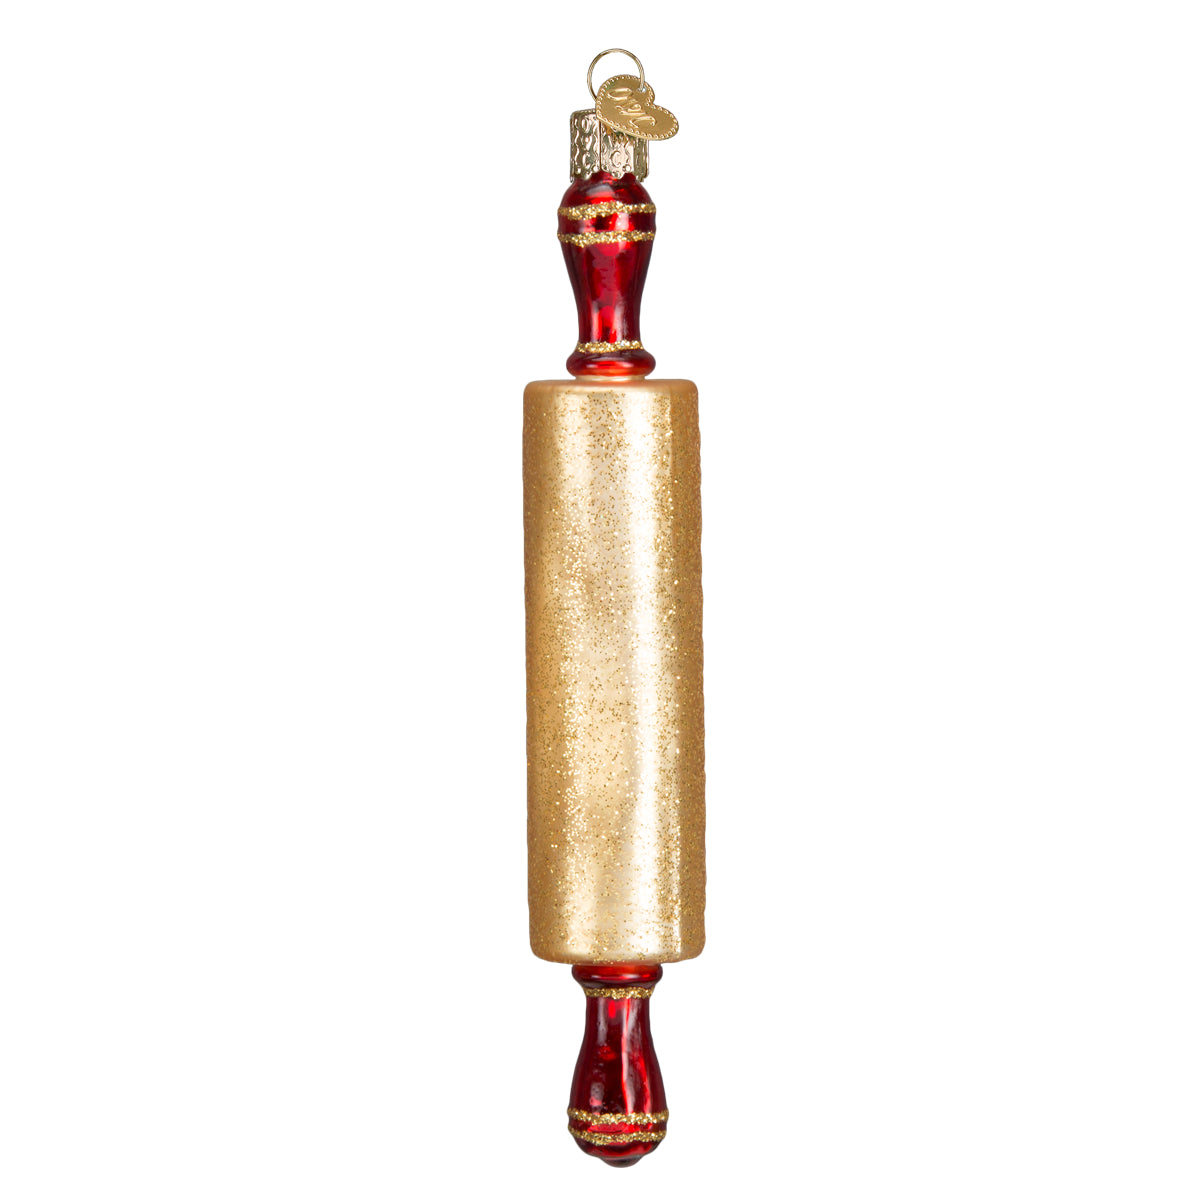 Rolling Pin Ornament